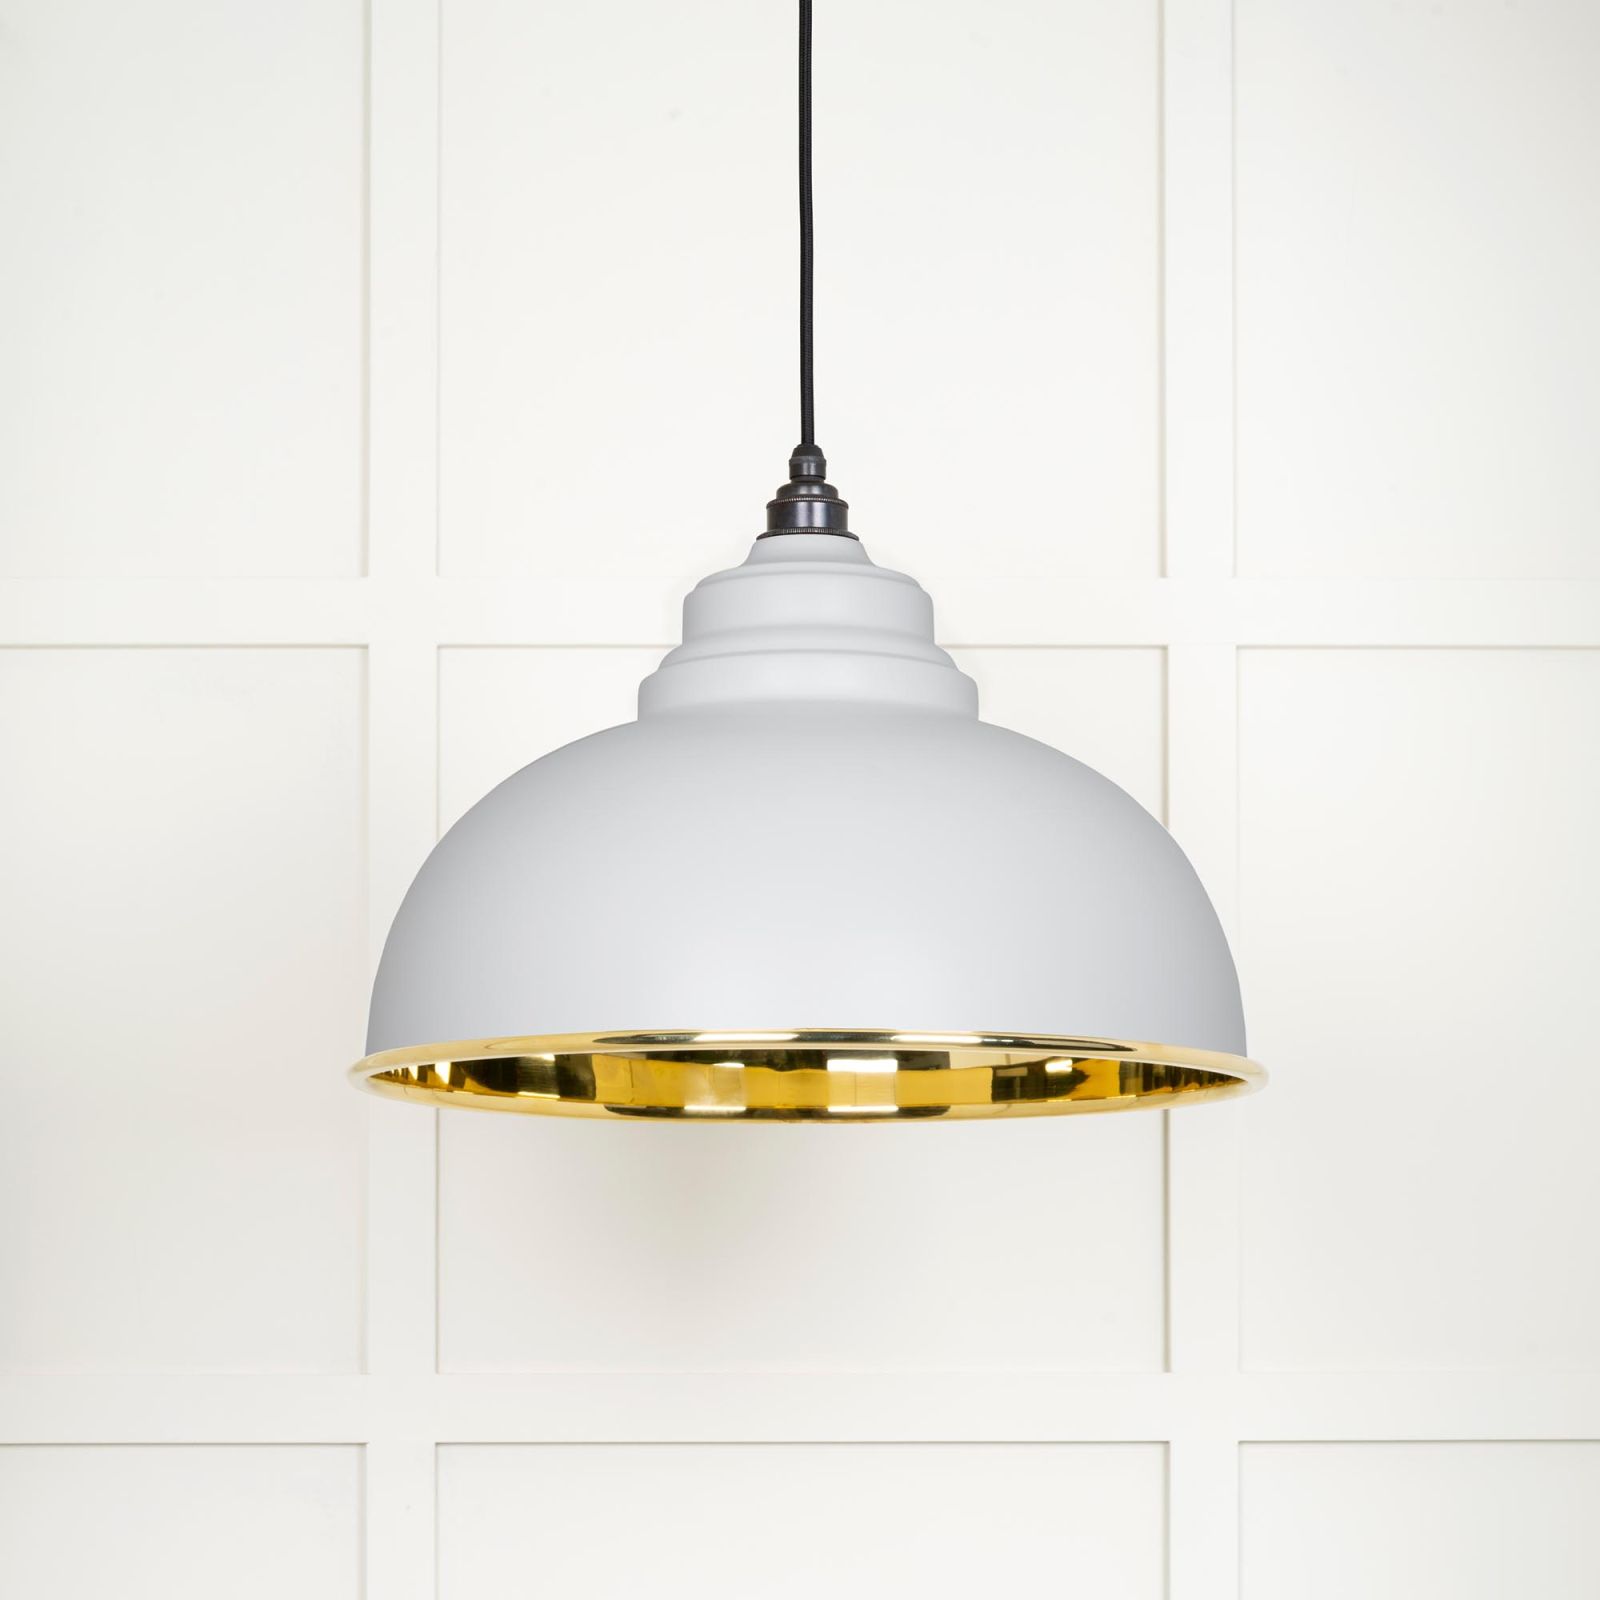 Harlow pendant light in smooth brass with painted Flock exterior